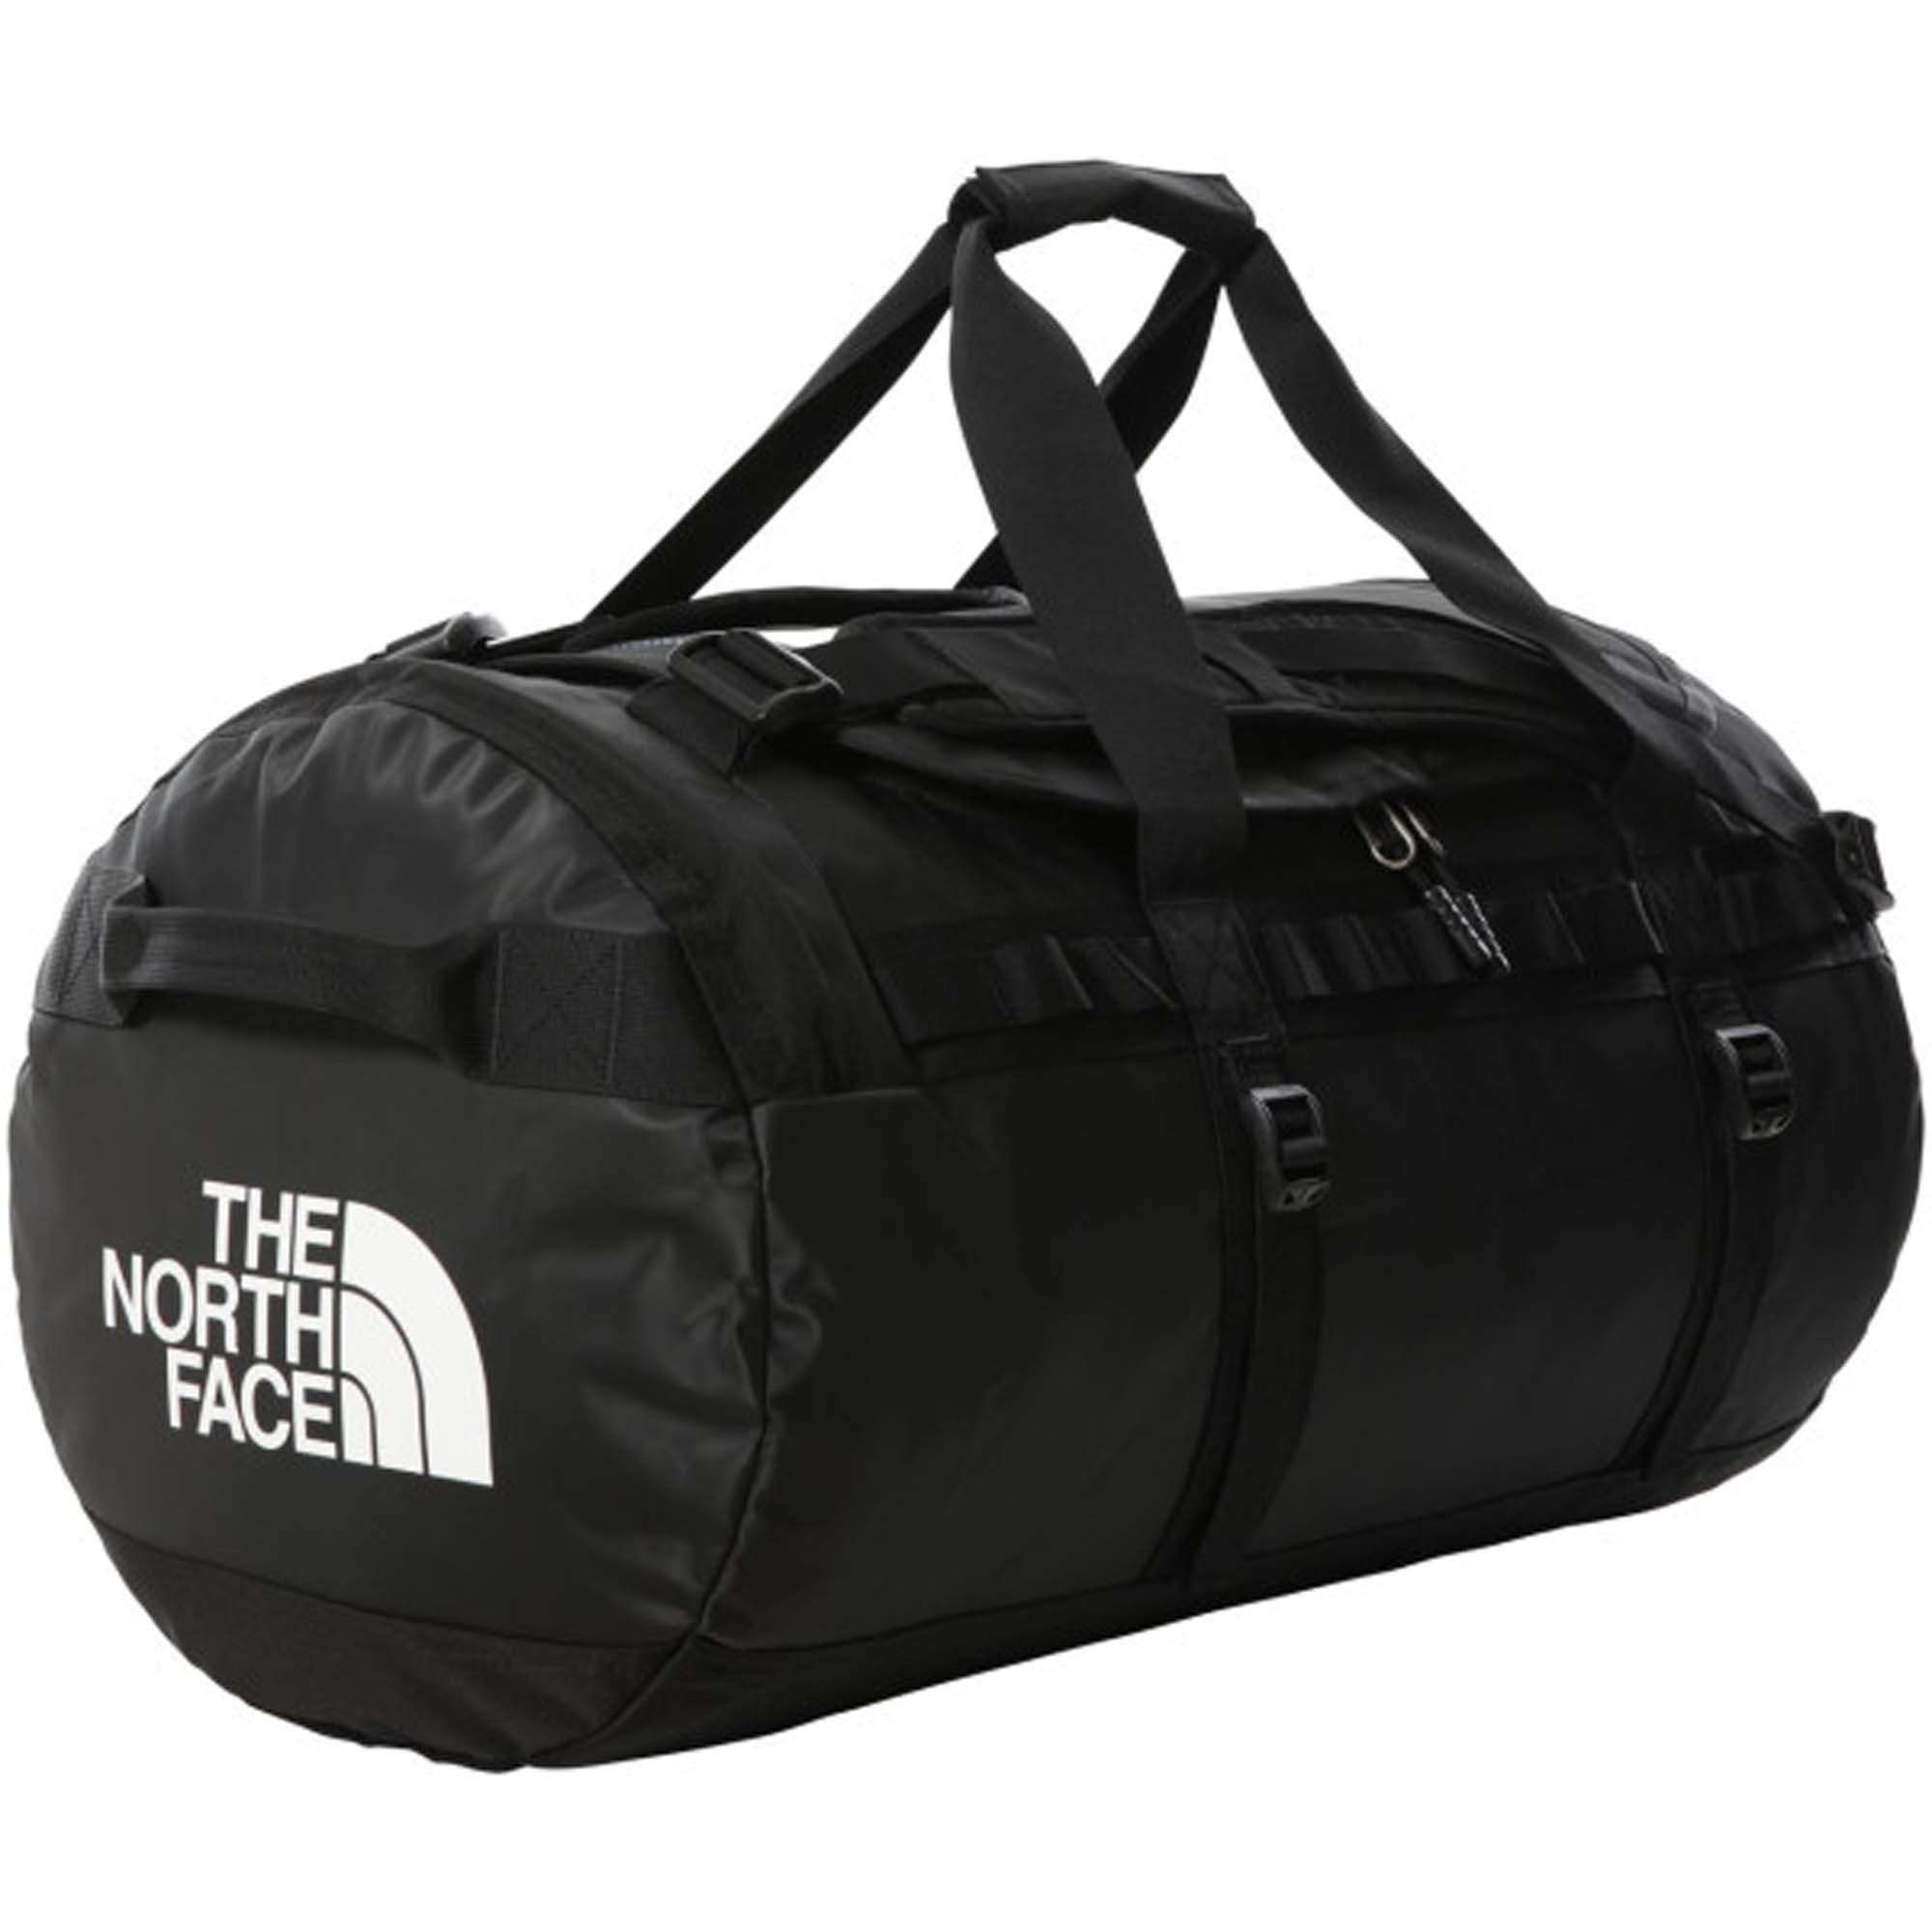 THE NORTH FACE base camp duffel